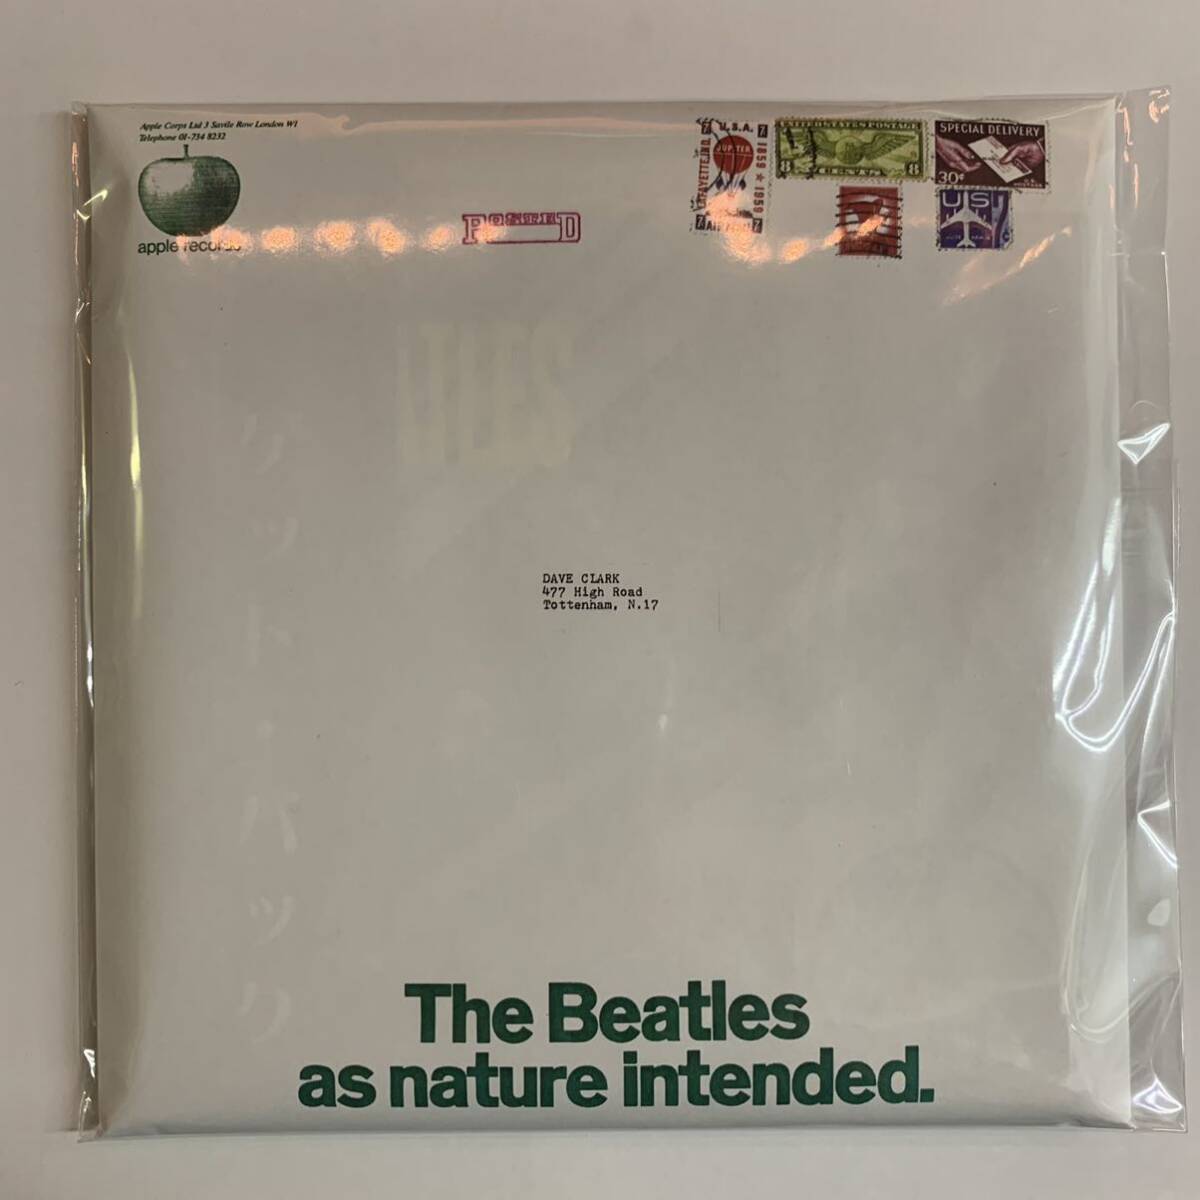 THE BEATLES : GET BACK STEREO DEMIX (CD)ROOF TOP STEREO DEMIX (CD) 限定AS NATURE INTENDED 封筒入り！完売タイトル！